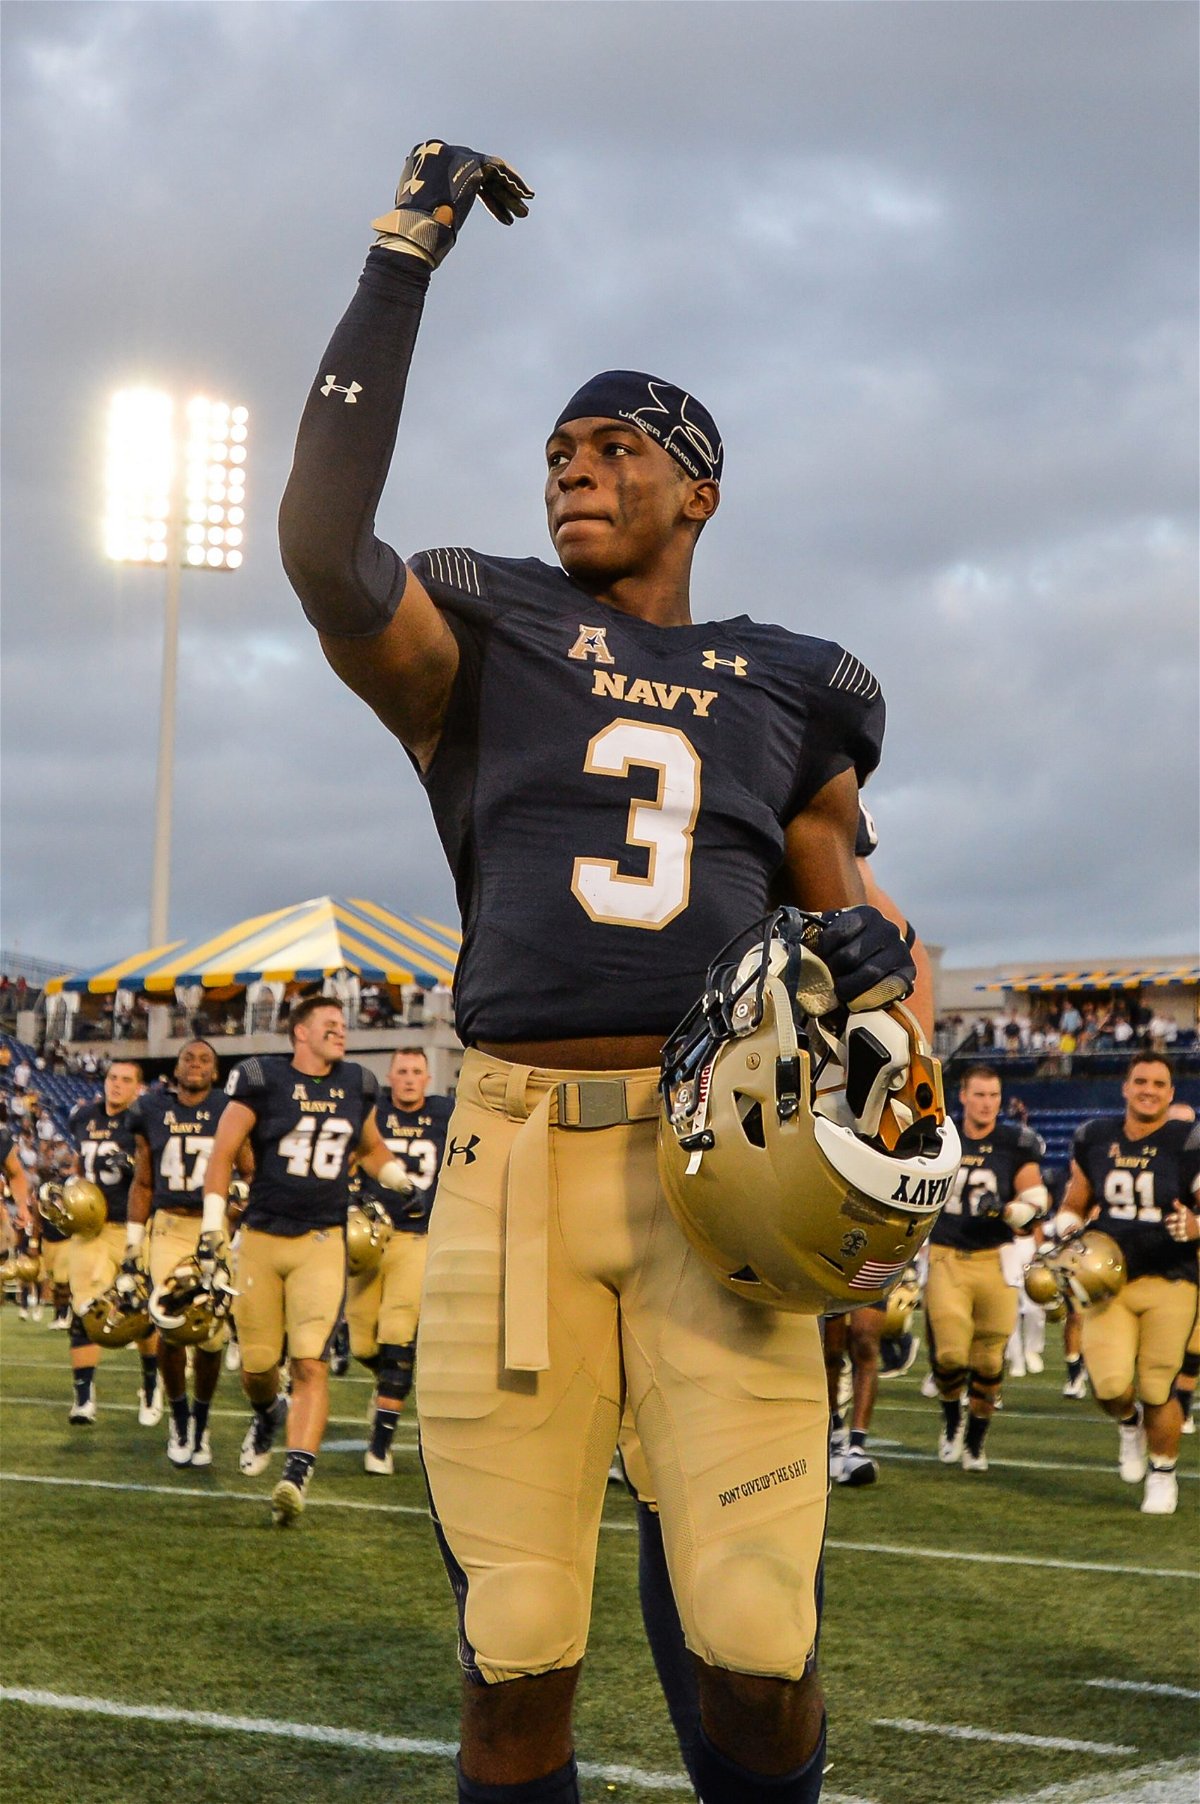 In reversal, US military allows Navy football captain to delay service to try to play in NFL